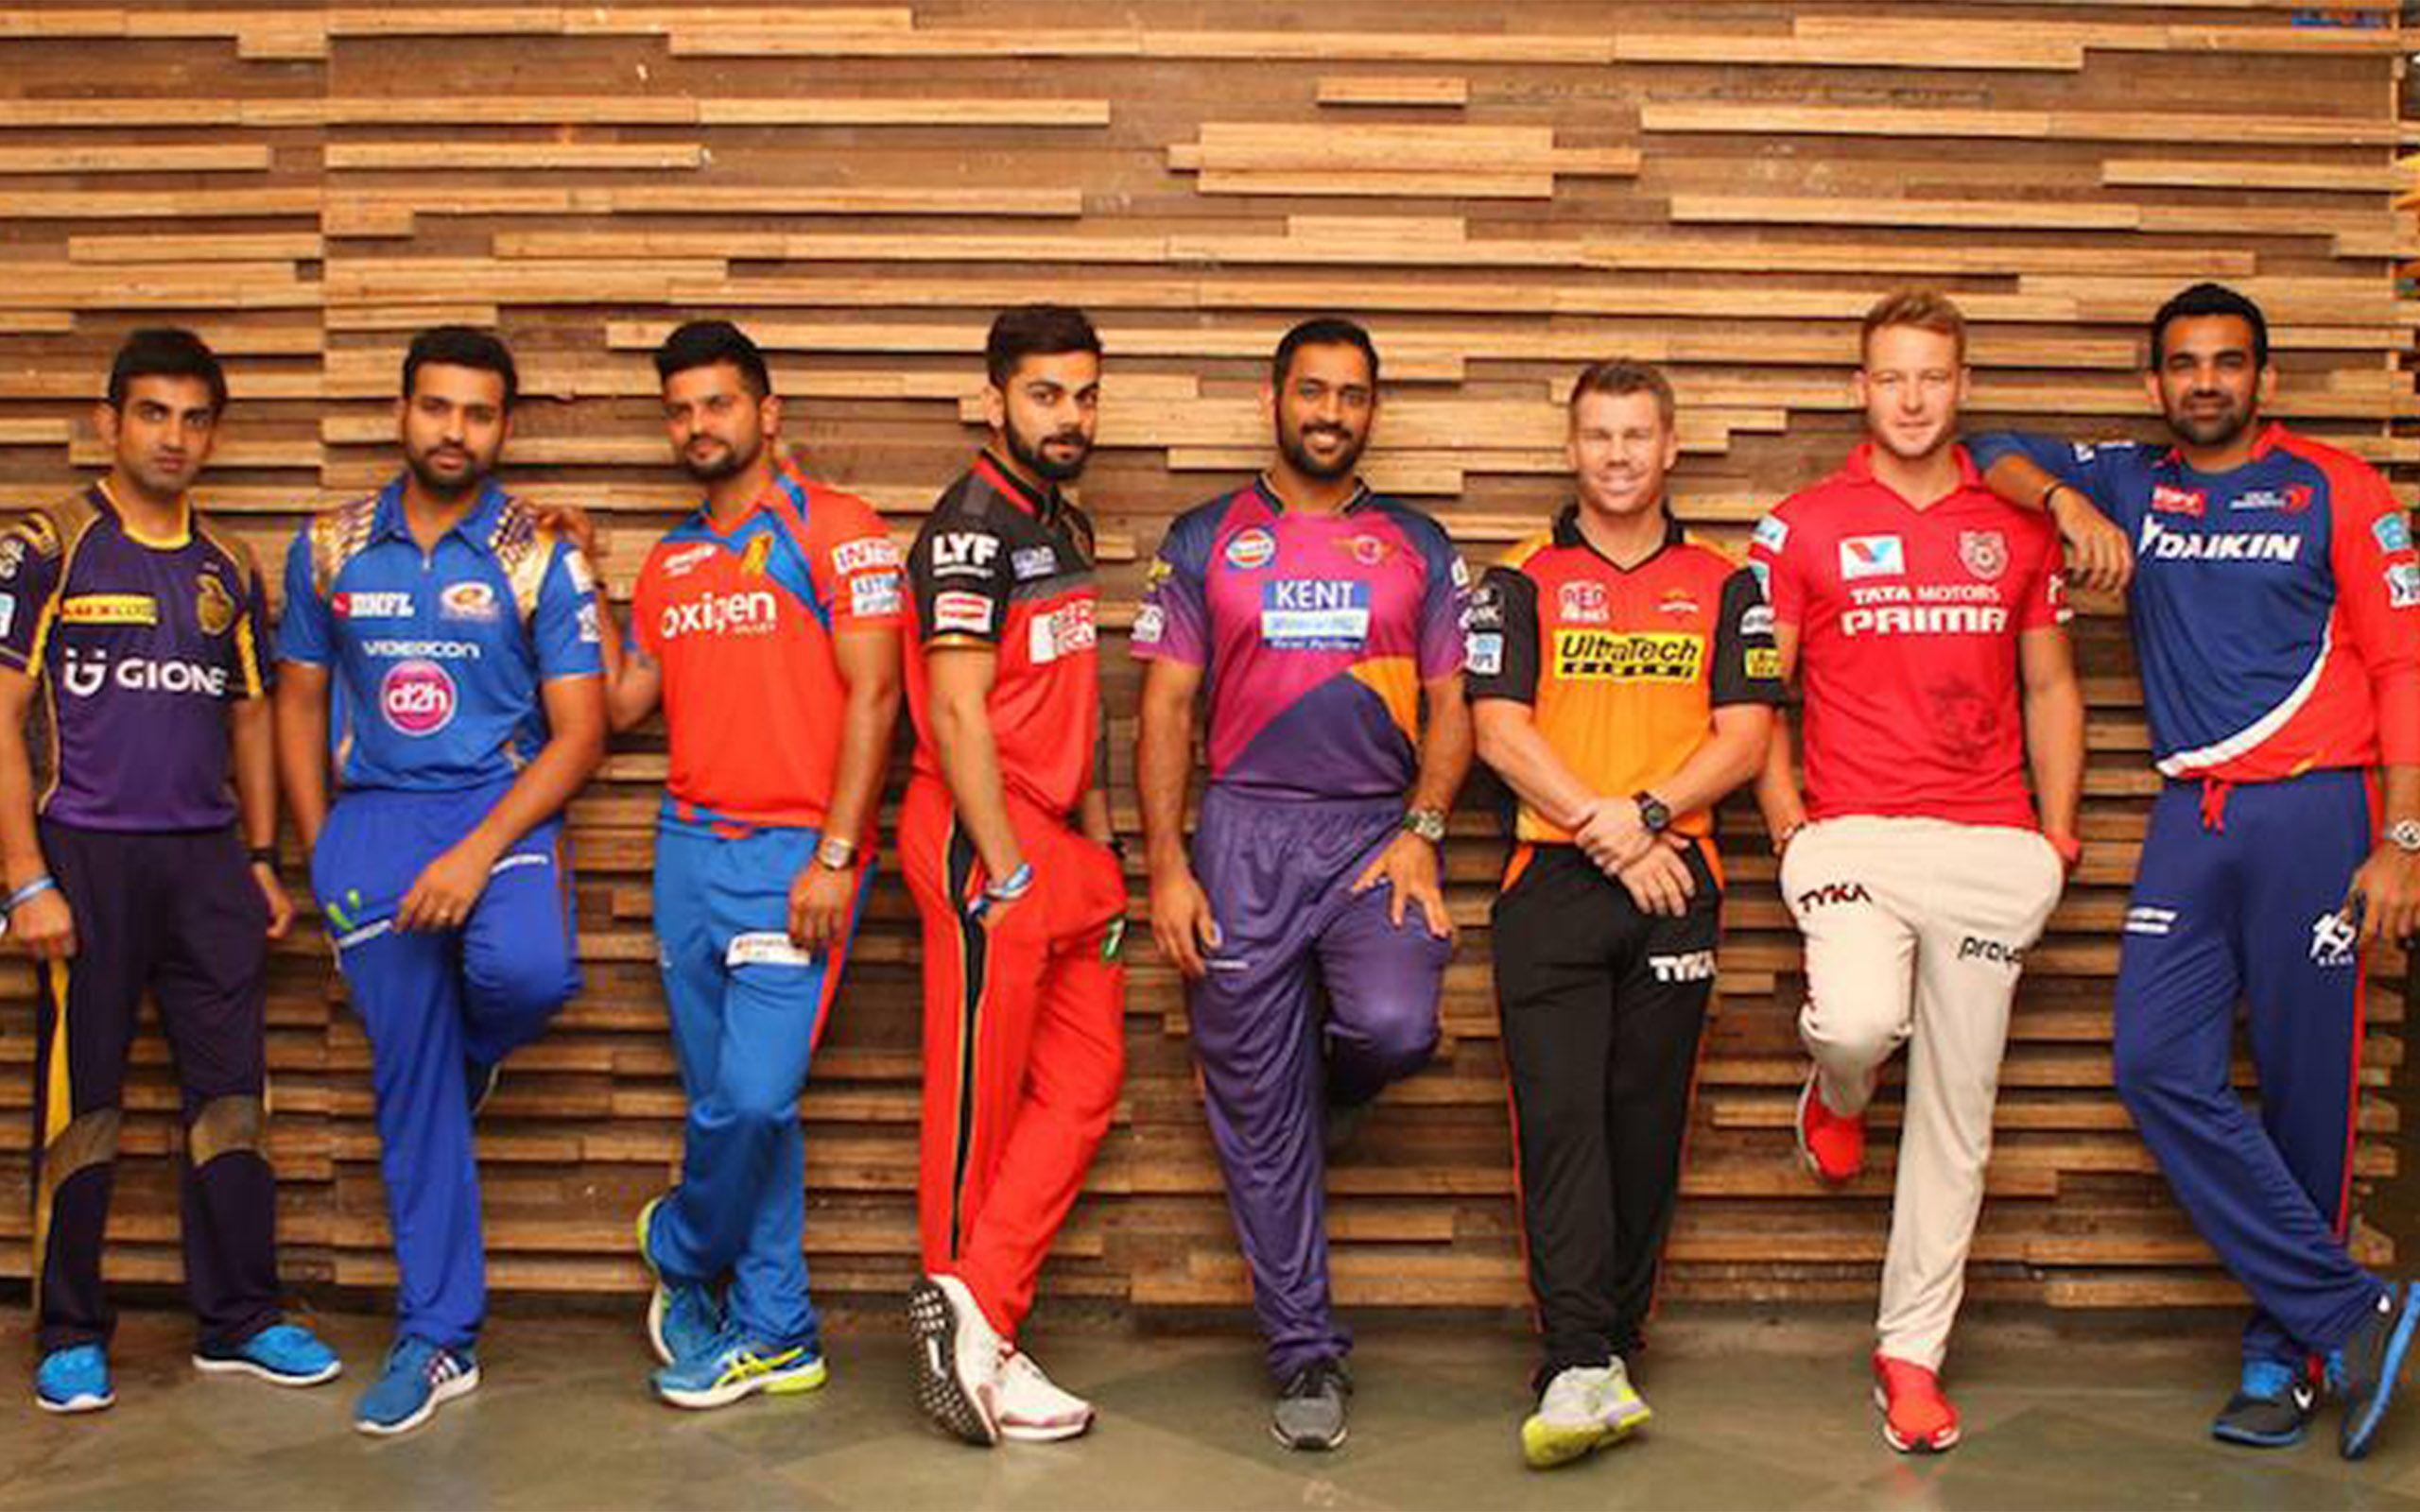 IPL 2017: 10 Edition Of The Tournament Under Threat As State